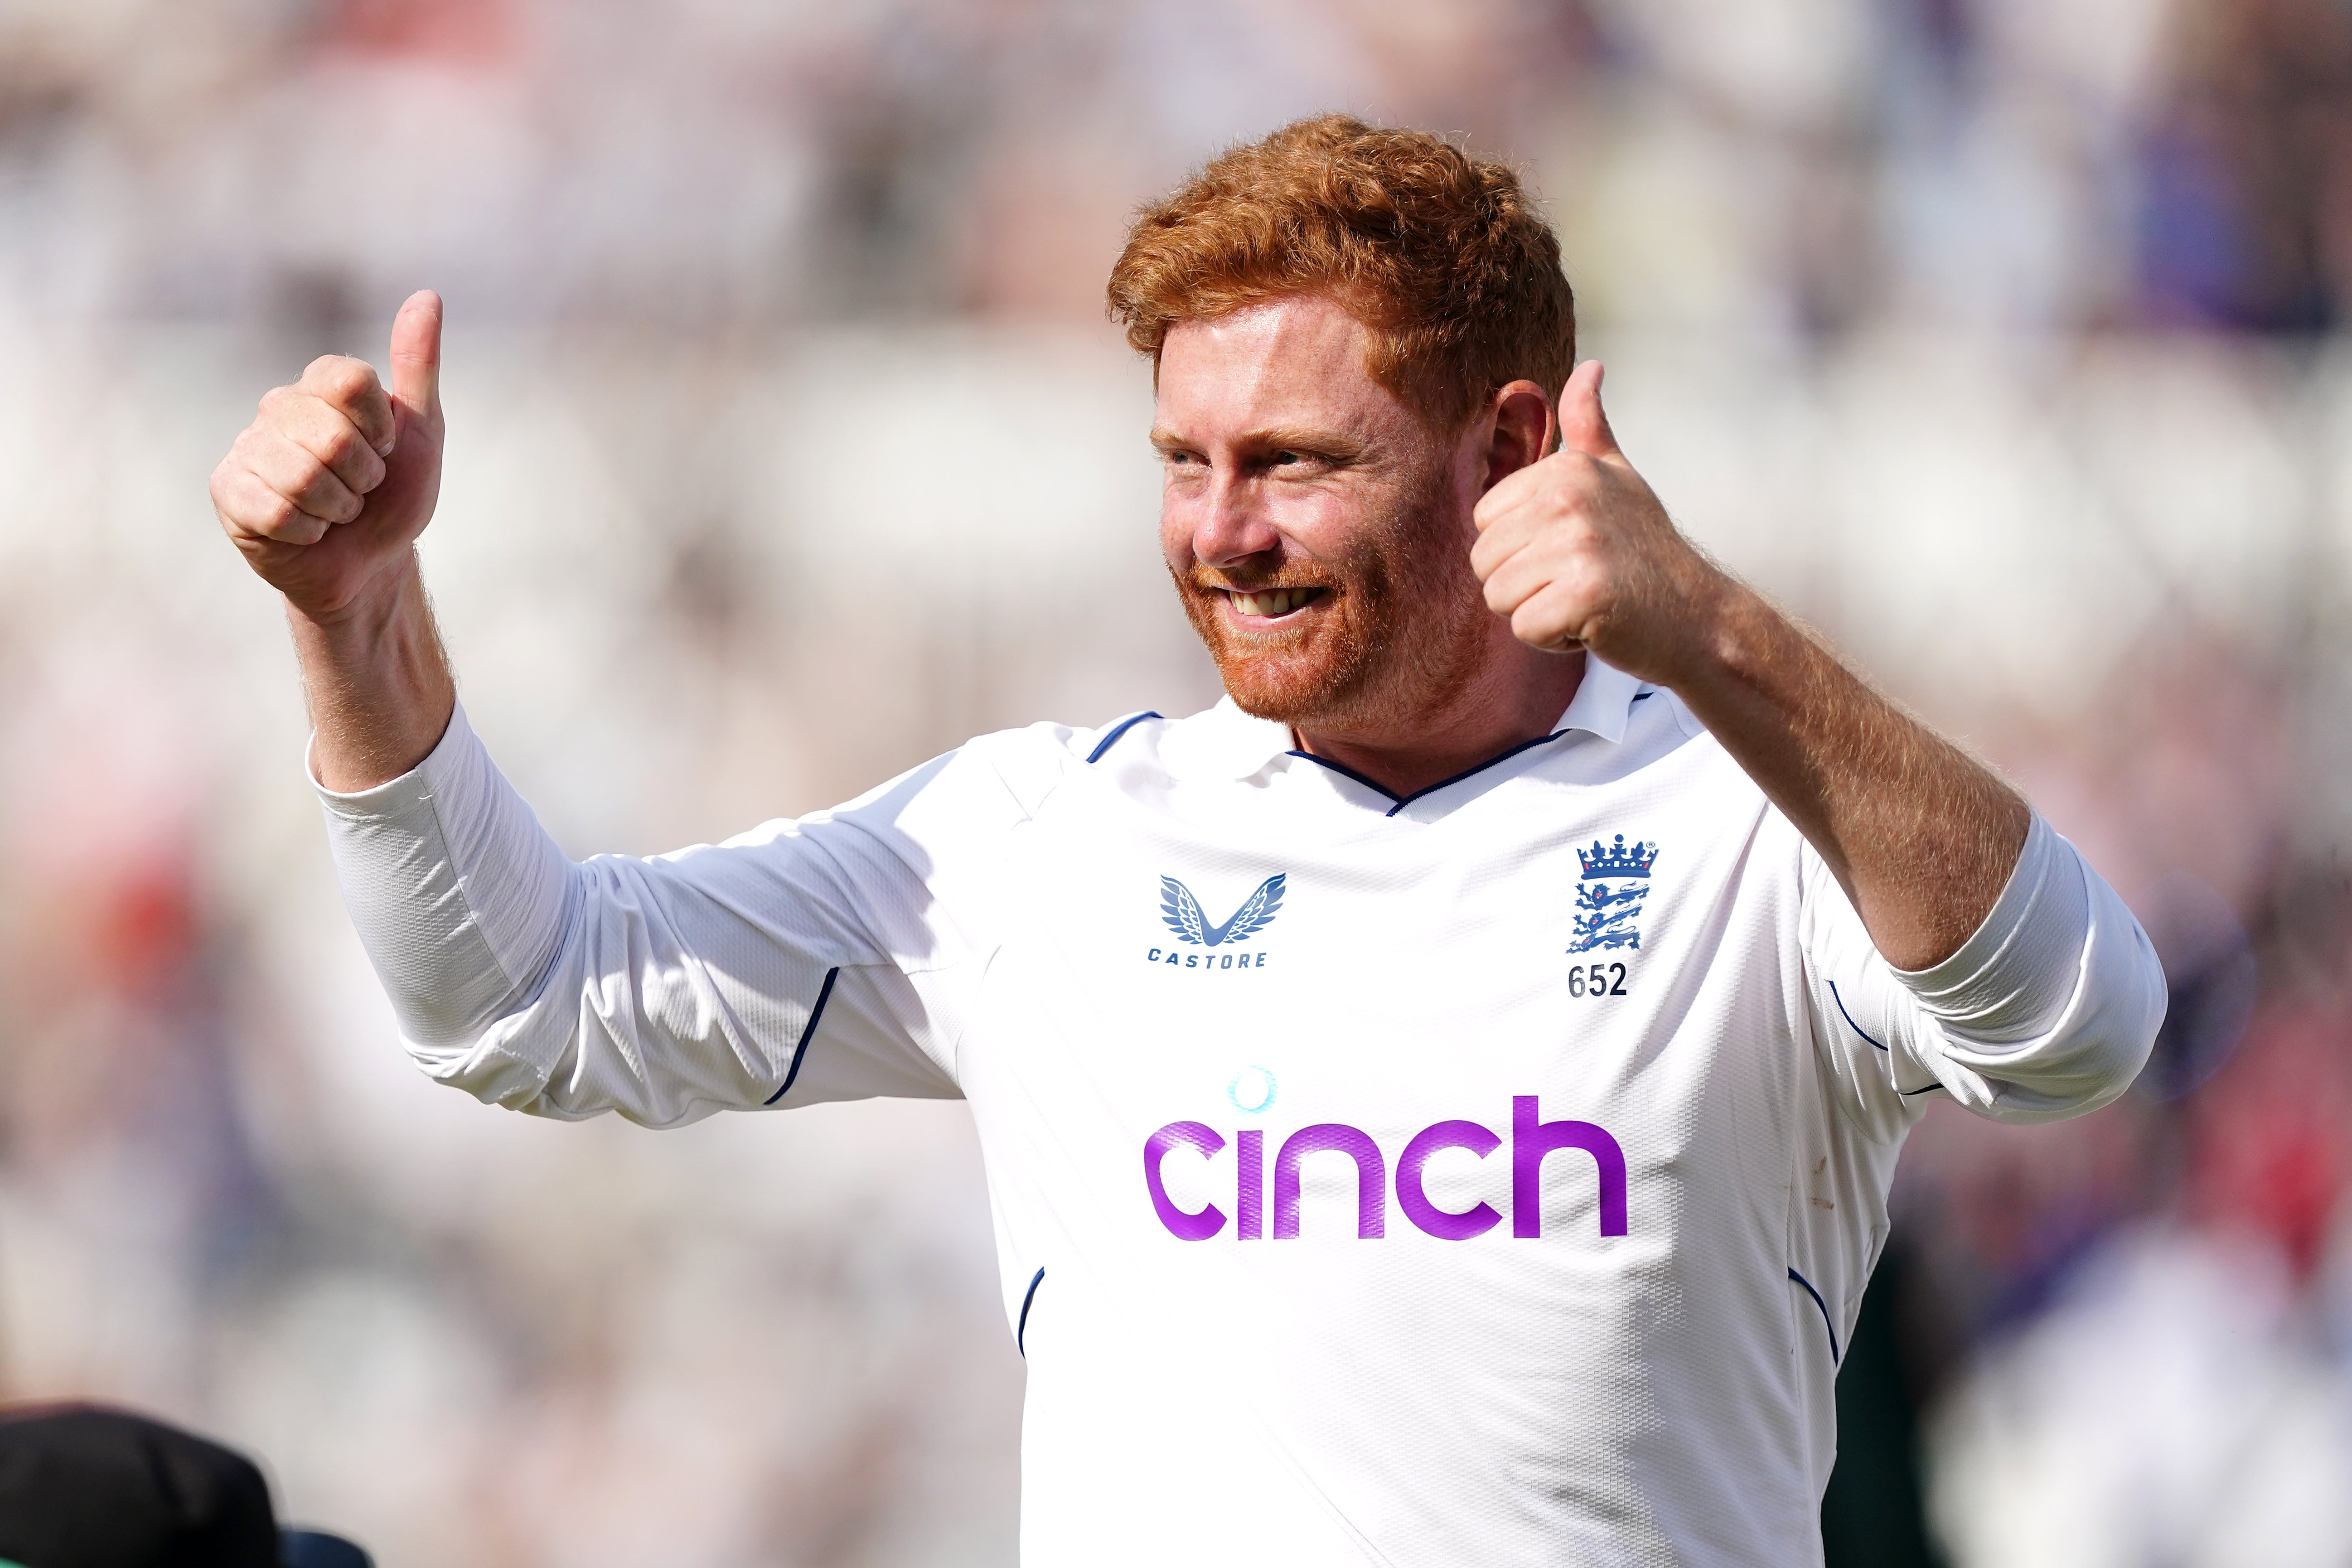 Bairstow salutes the crowd after his unbeaten 136 at Trent Bridge